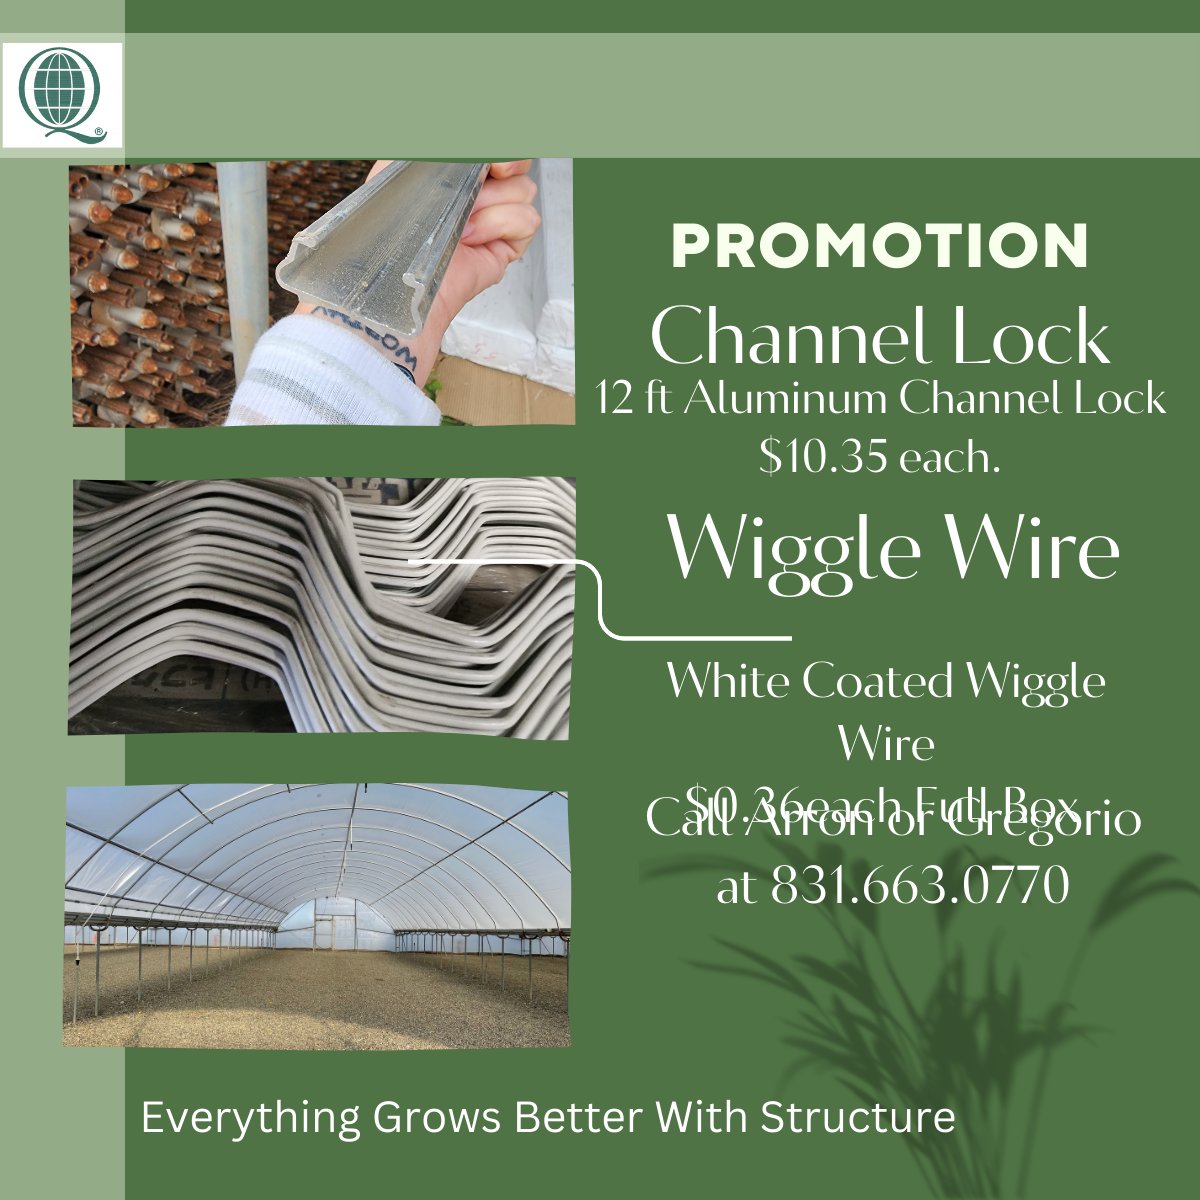 #SPECIALPROMOTION Check it out! and give our sales team here at #Quiedan a call.  Arron or Gregorio can help with any of your needs. #831-663-0770Because #EverythingGrowsBetterWithStructure